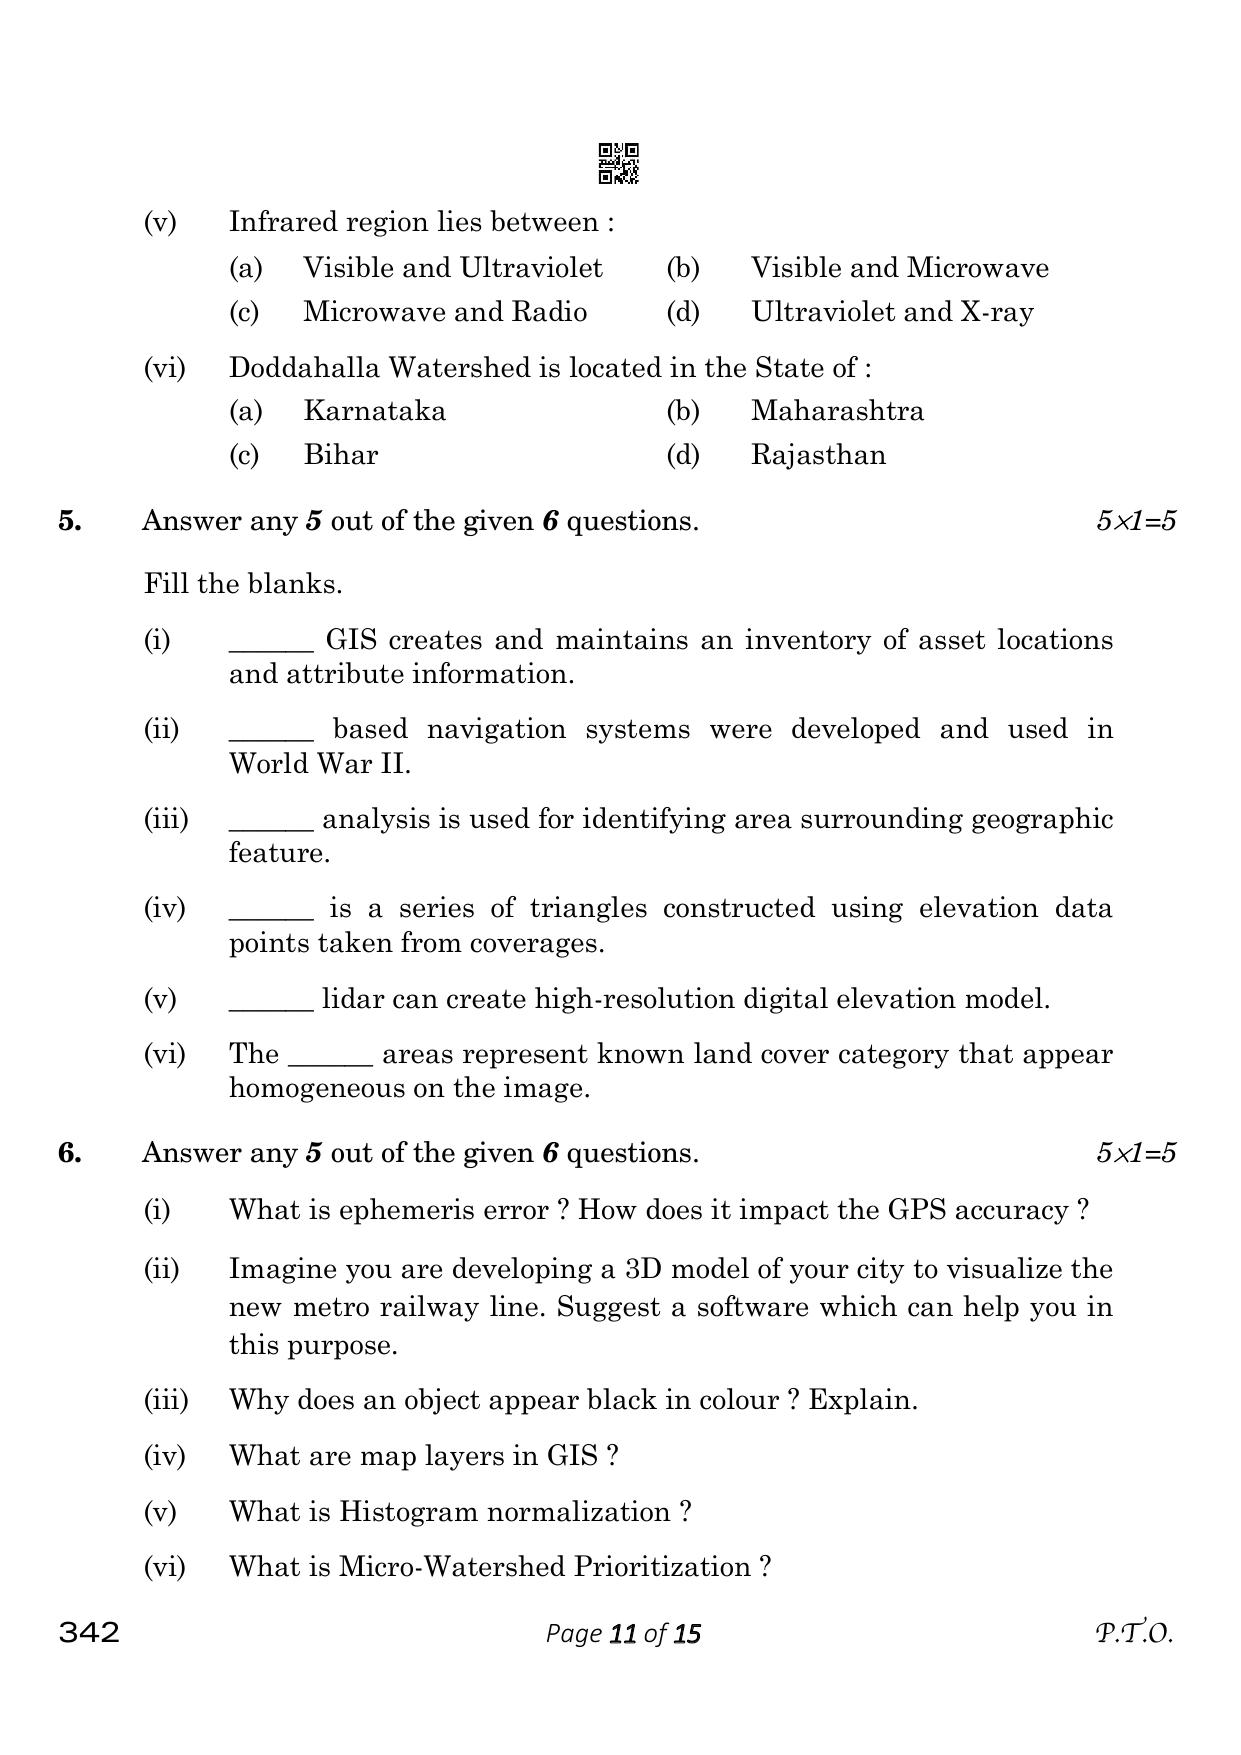 CBSE Class 12 342_Geospatial Technology 2023 Question Paper - Page 11